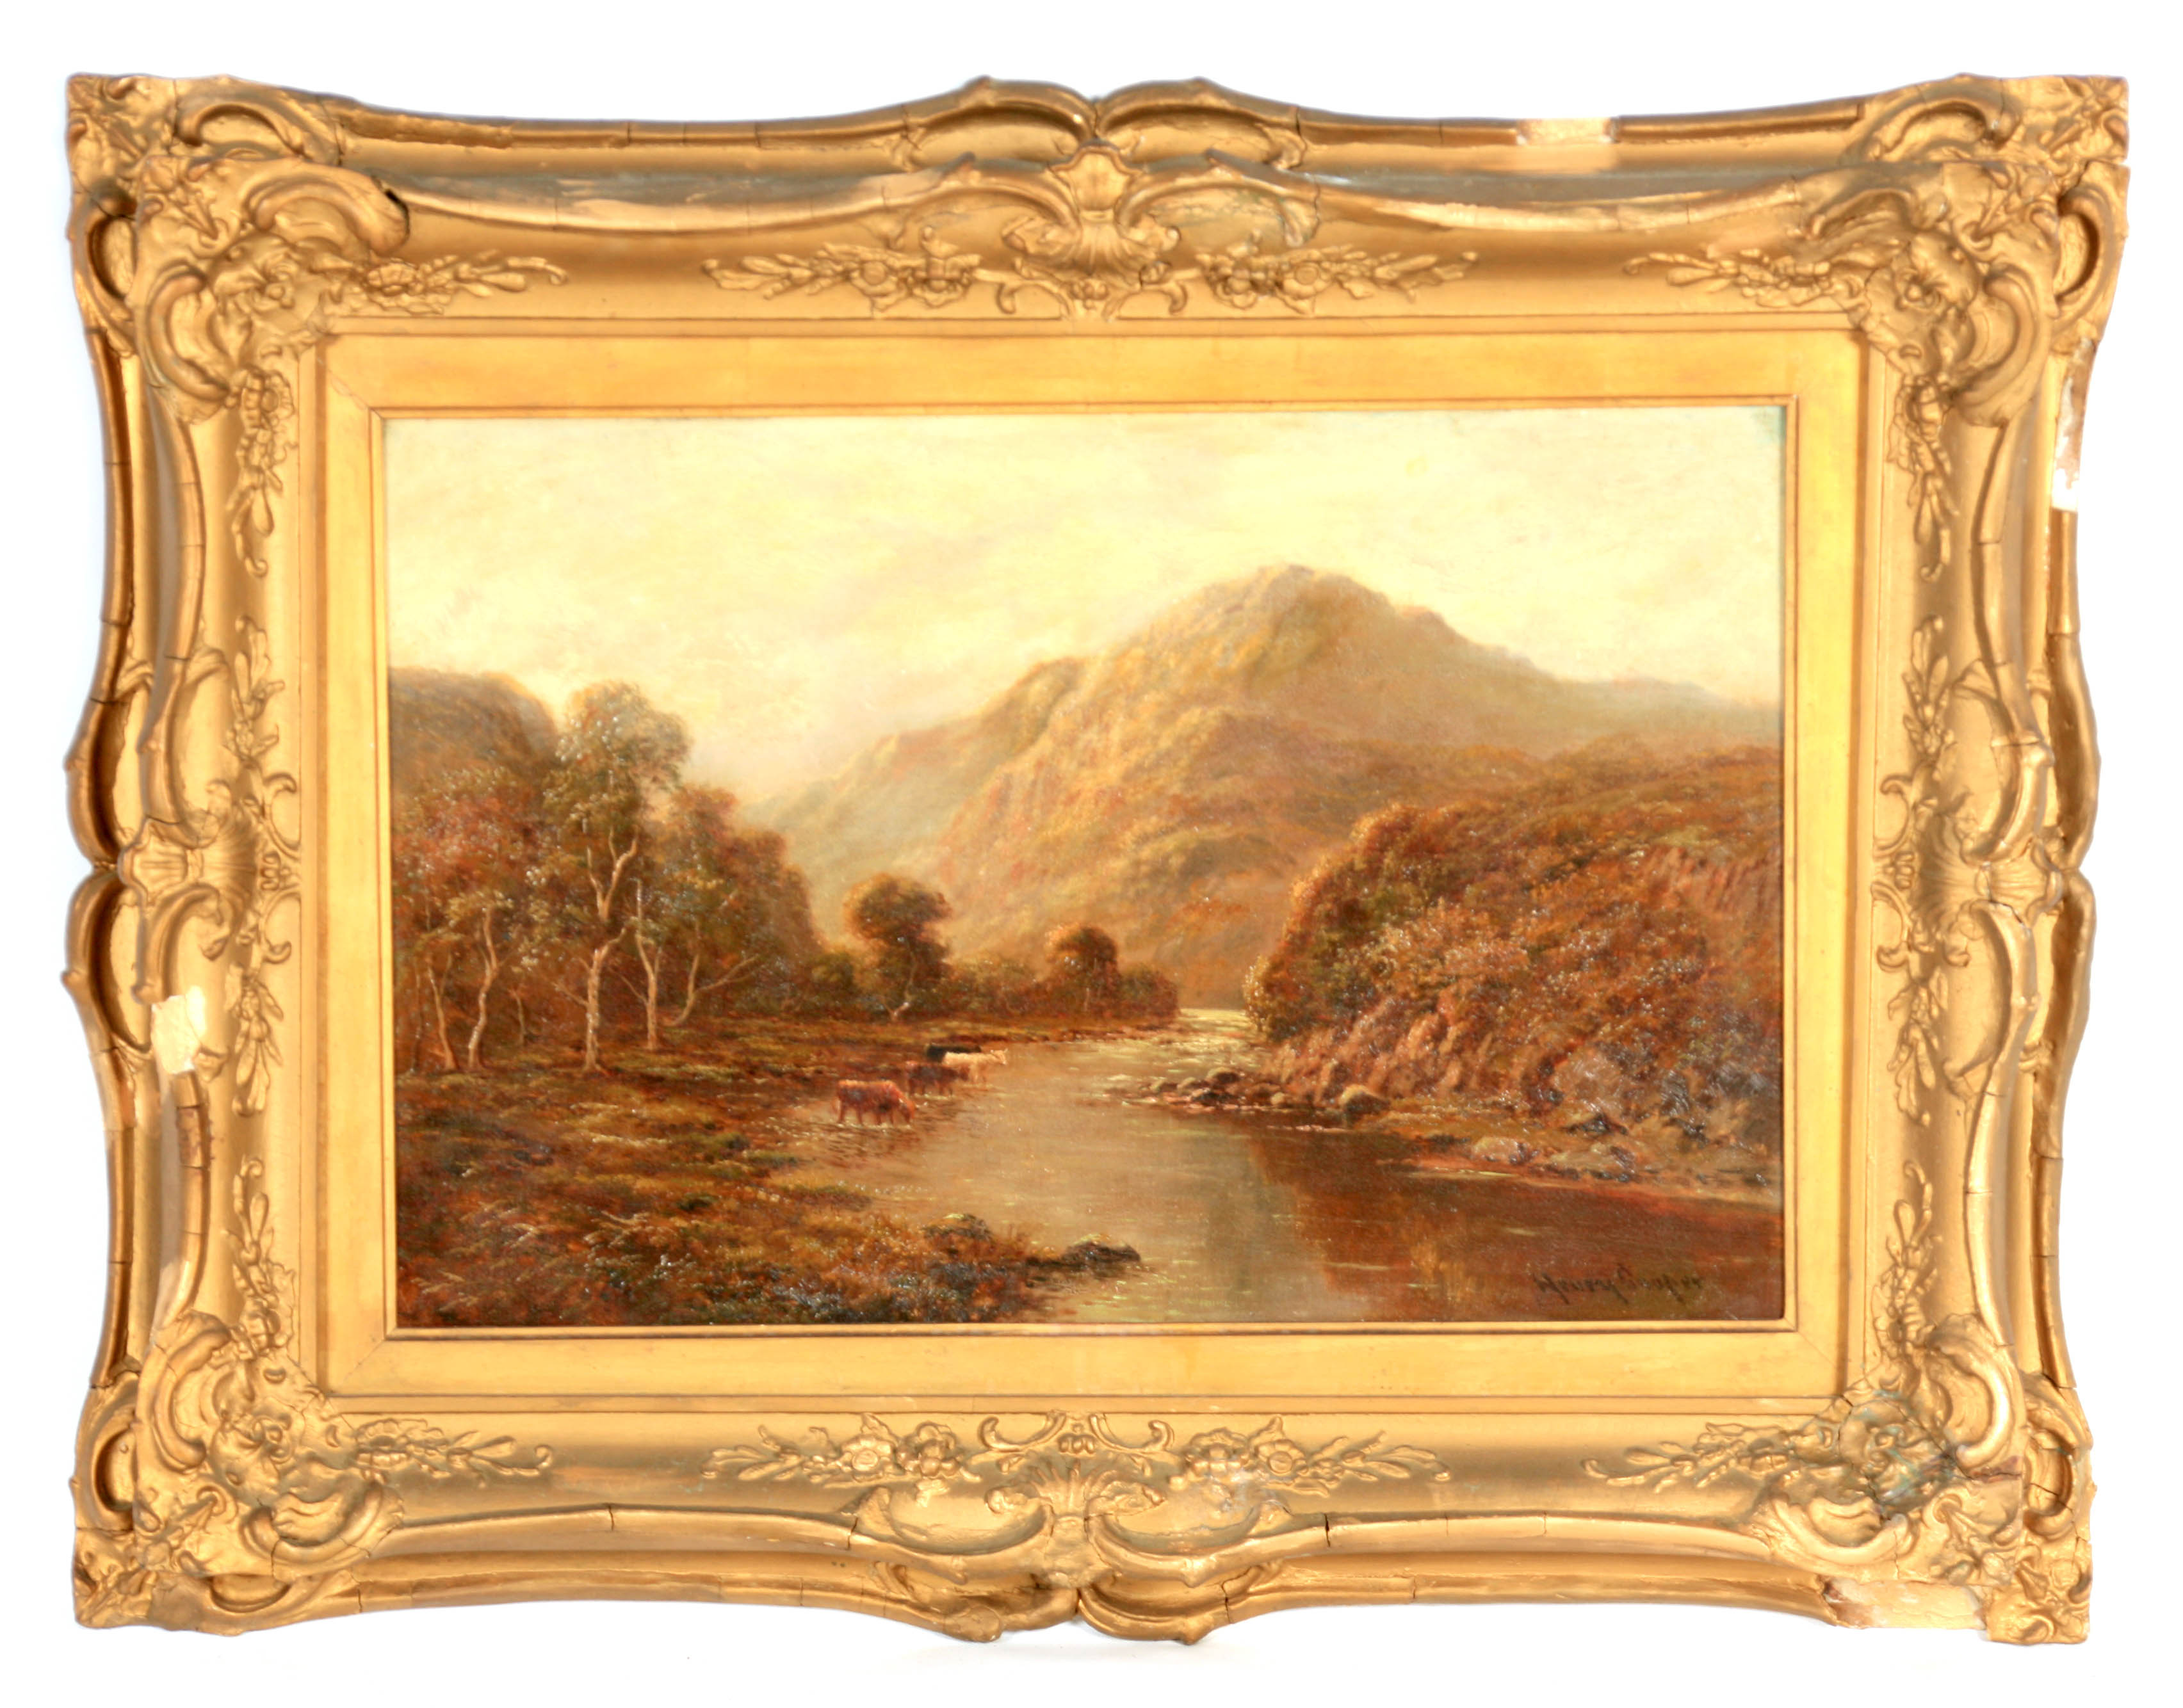 HENRY COOPER A LATE 19TH CENTURY OIL ON CANVAS highland scene with cattle watering 39cm high 60cm